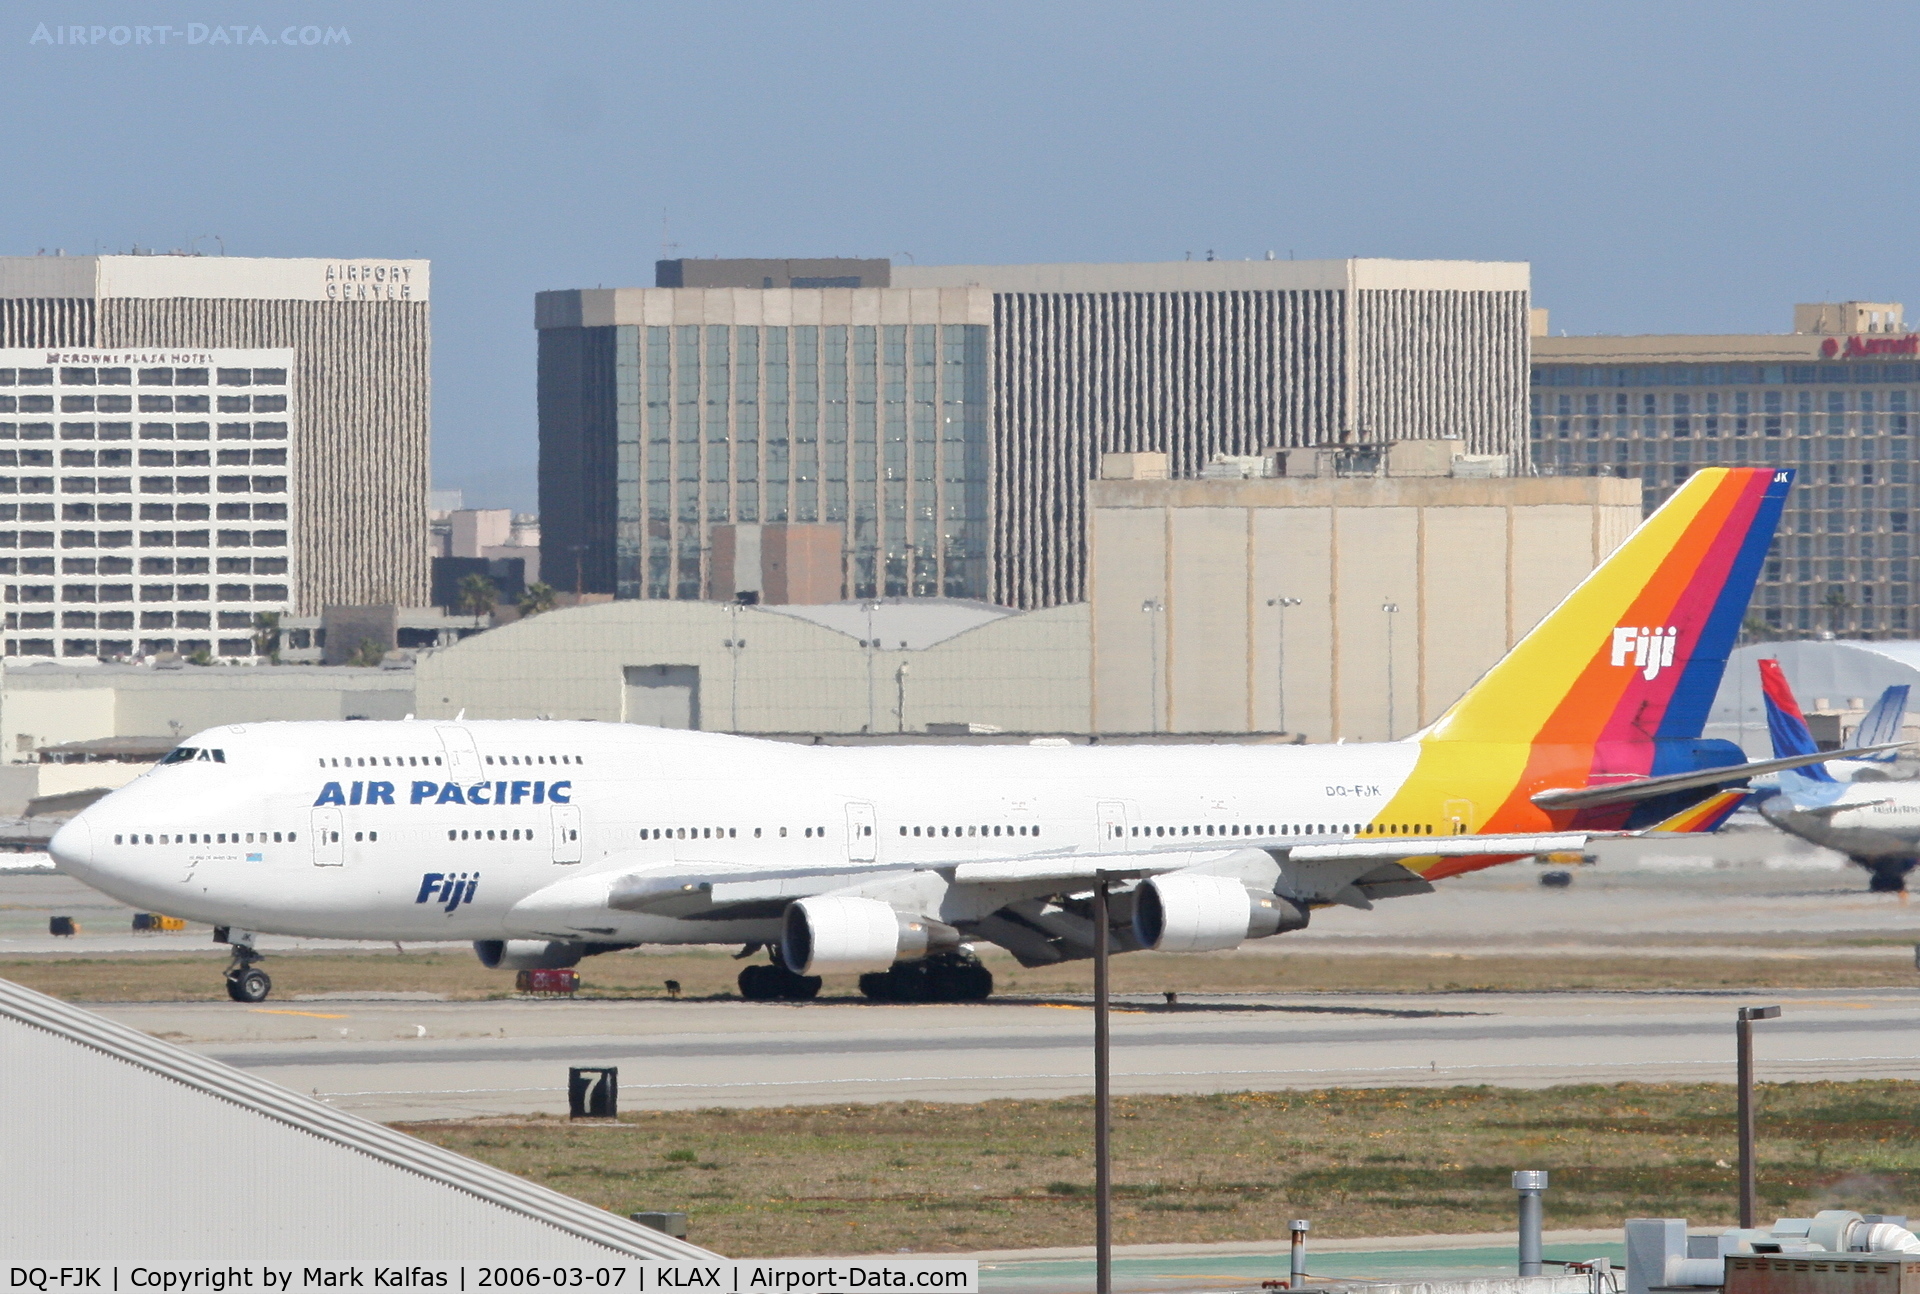 DQ-FJK, 1989 Boeing 747-412 C/N 24064, Air Pacific Boeing 747-412, rolling out on 25L KLAX.